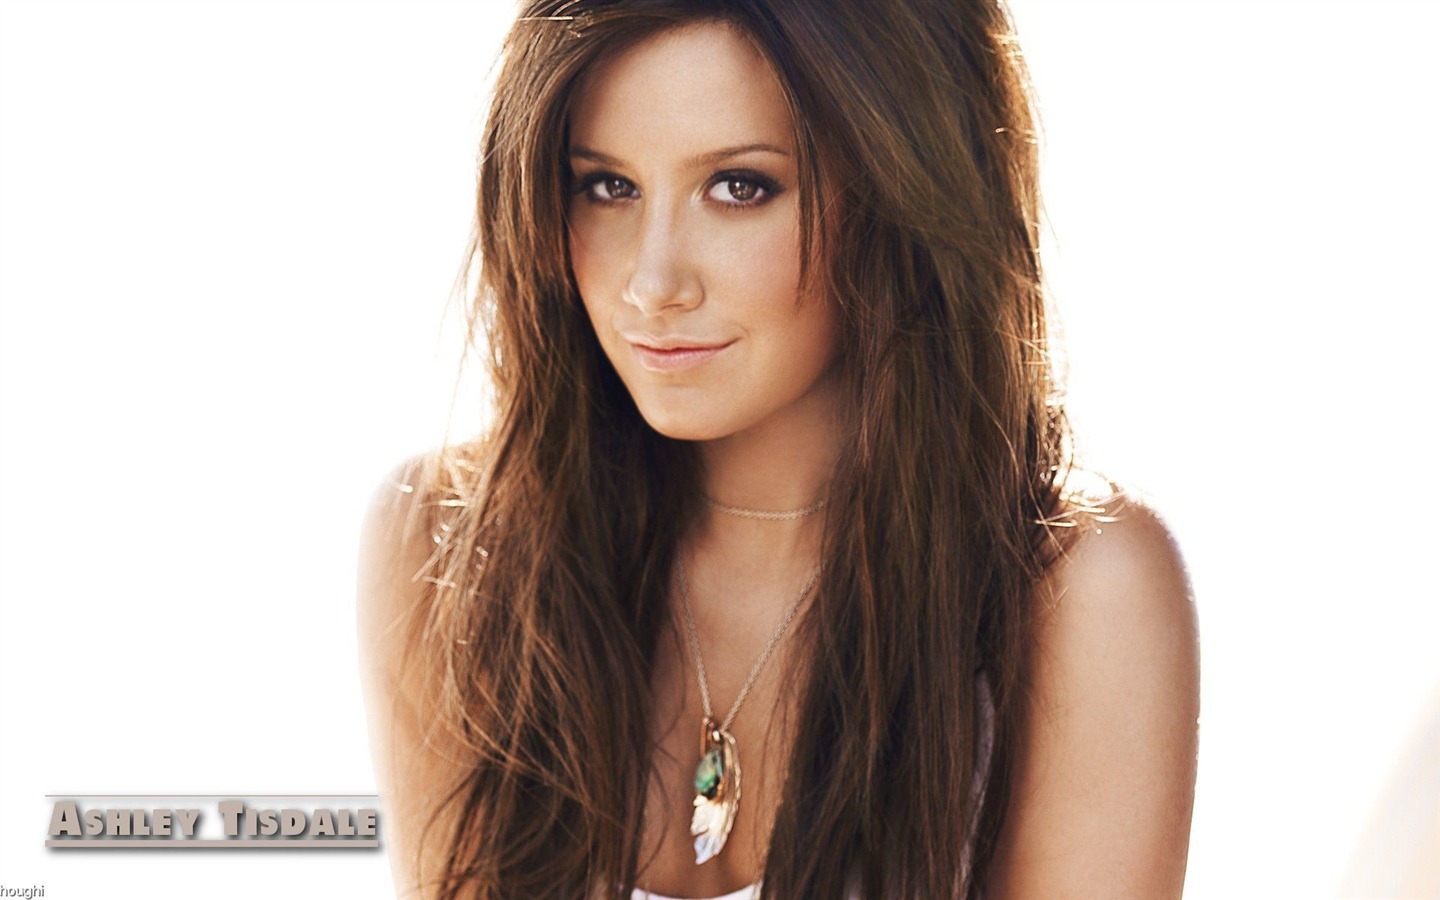 Ashley Tisdale #002 - 1440x900 Wallpapers Pictures Photos Images